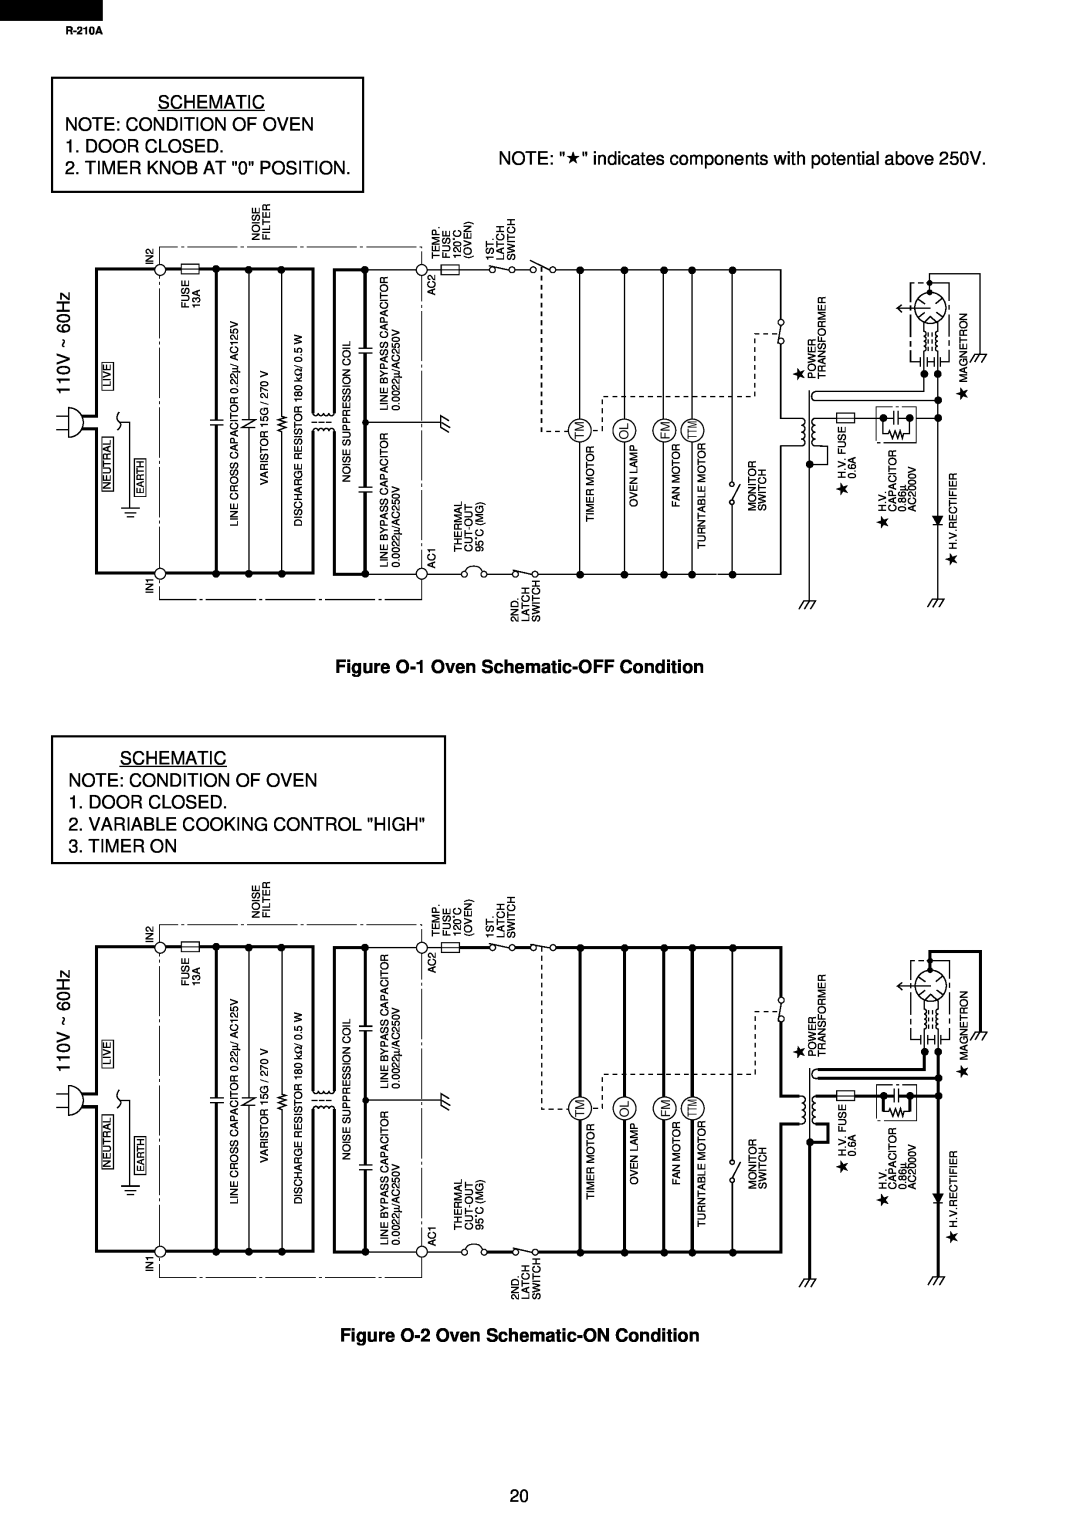 Sharp R-210A specifications O-2Oven Schematic-ONCondition, O-1Oven Schematic-OFFCondition 